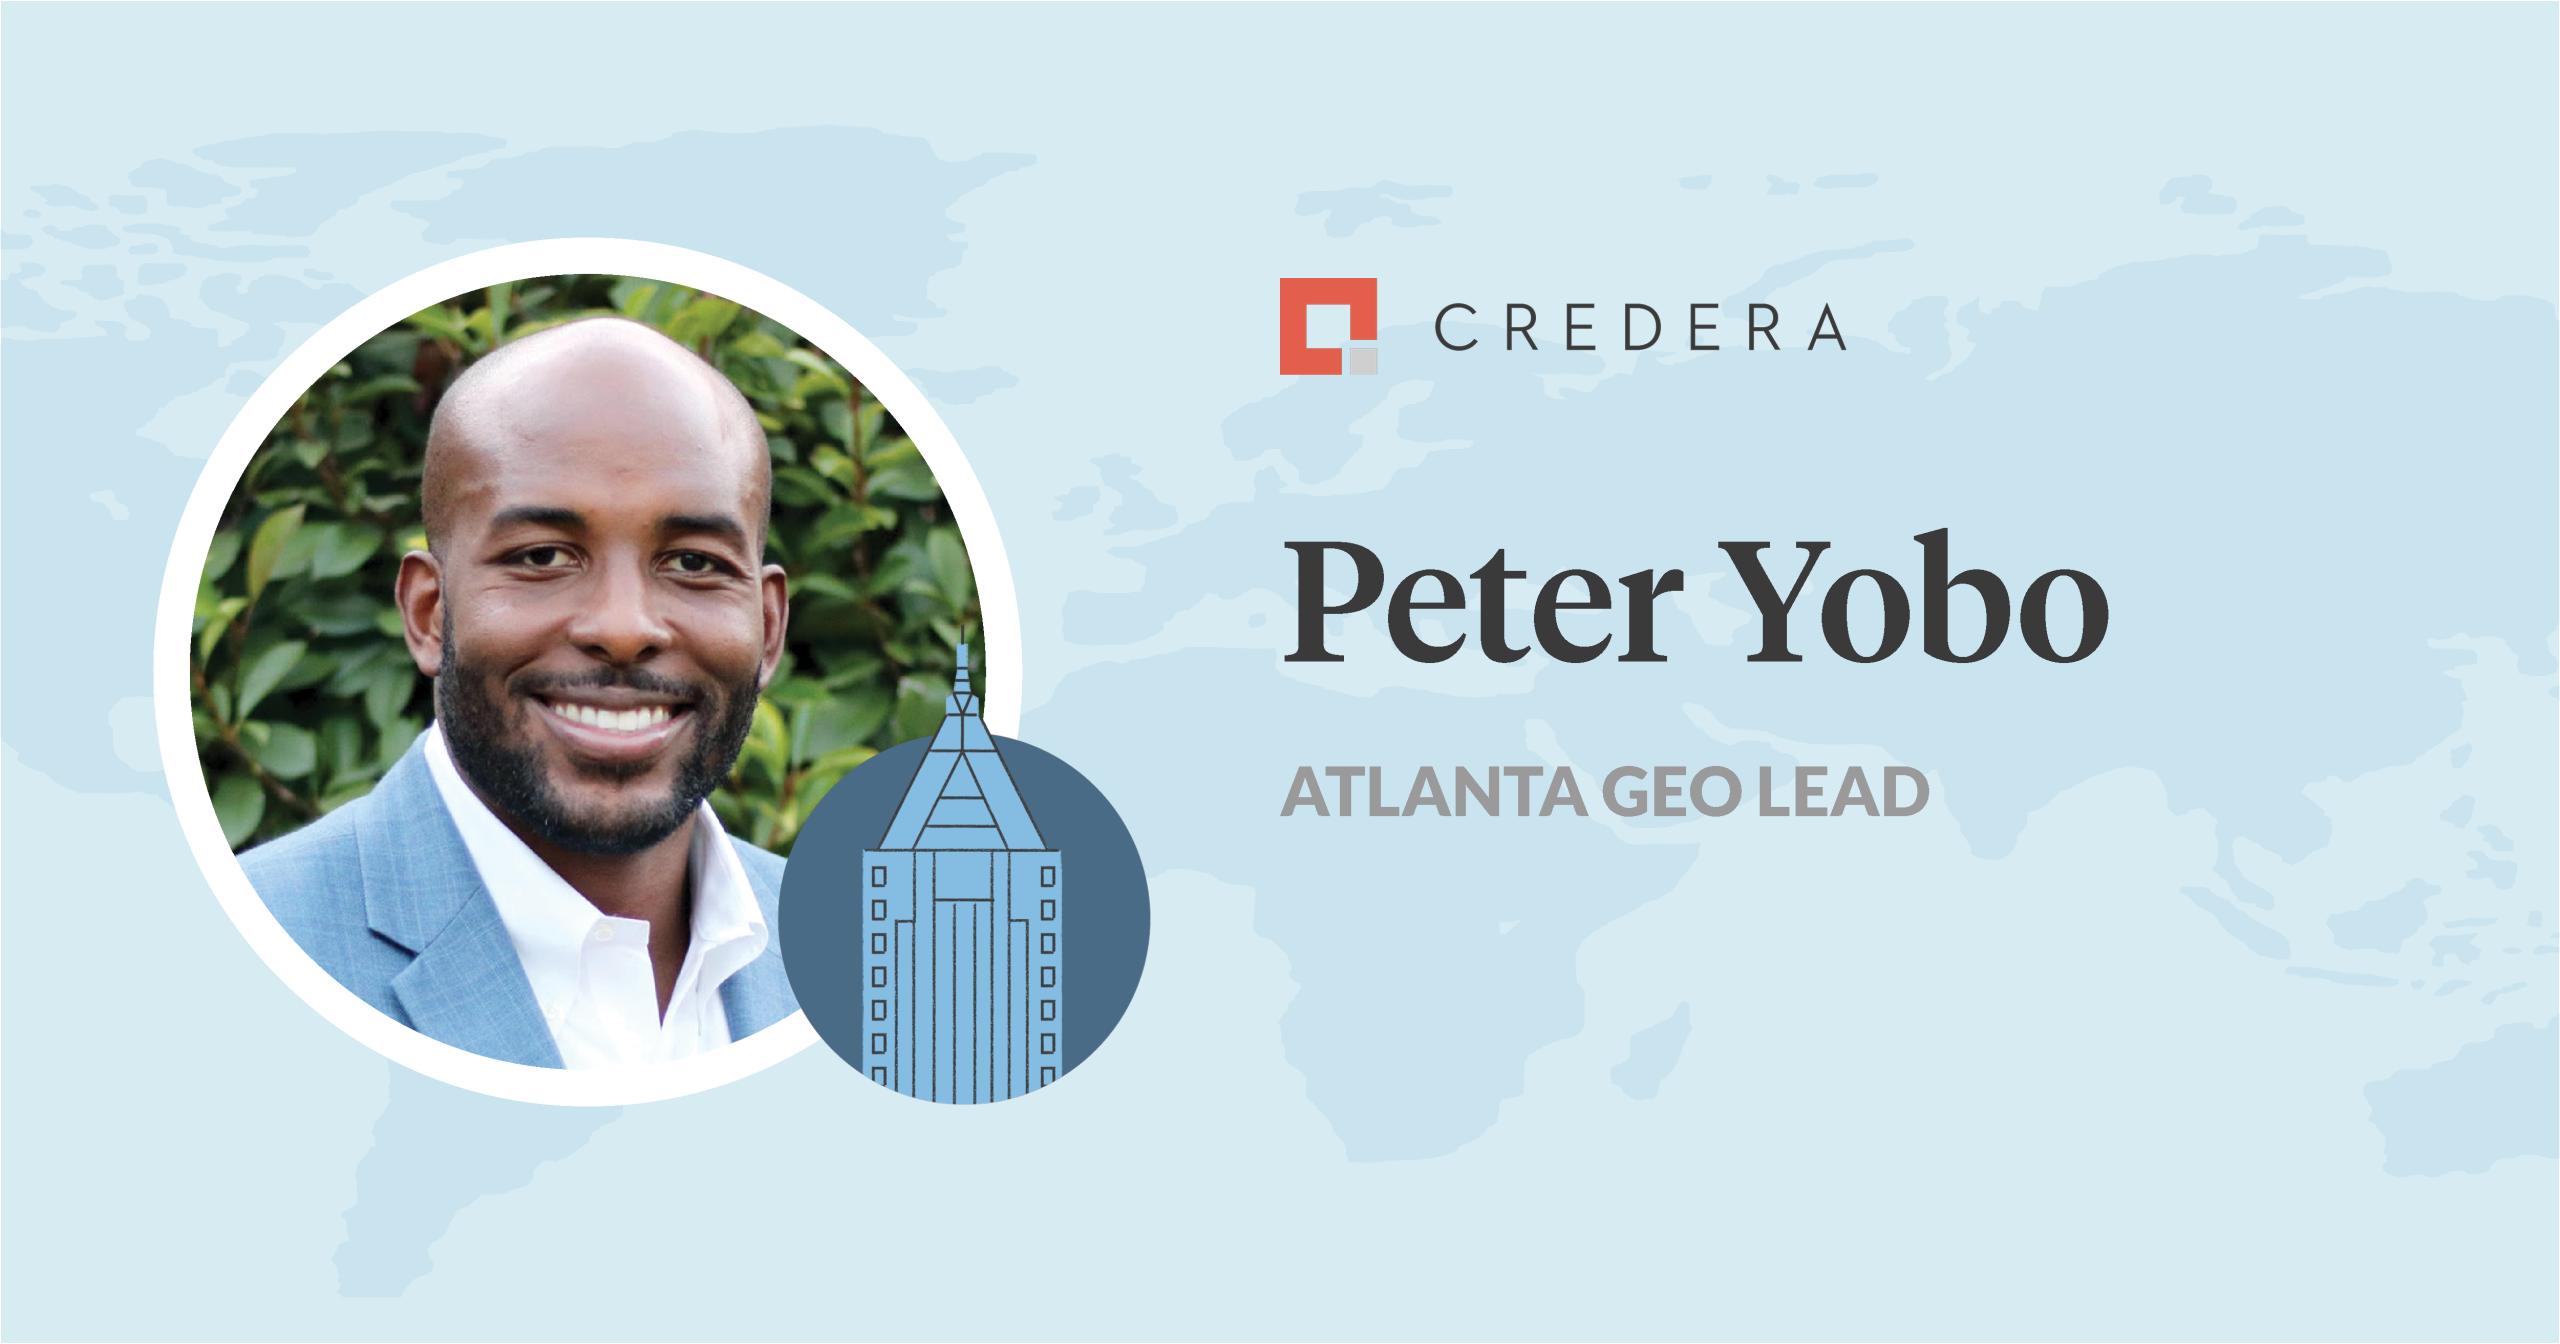 Q&A With Peter Yobo: Geography Lead, Atlanta